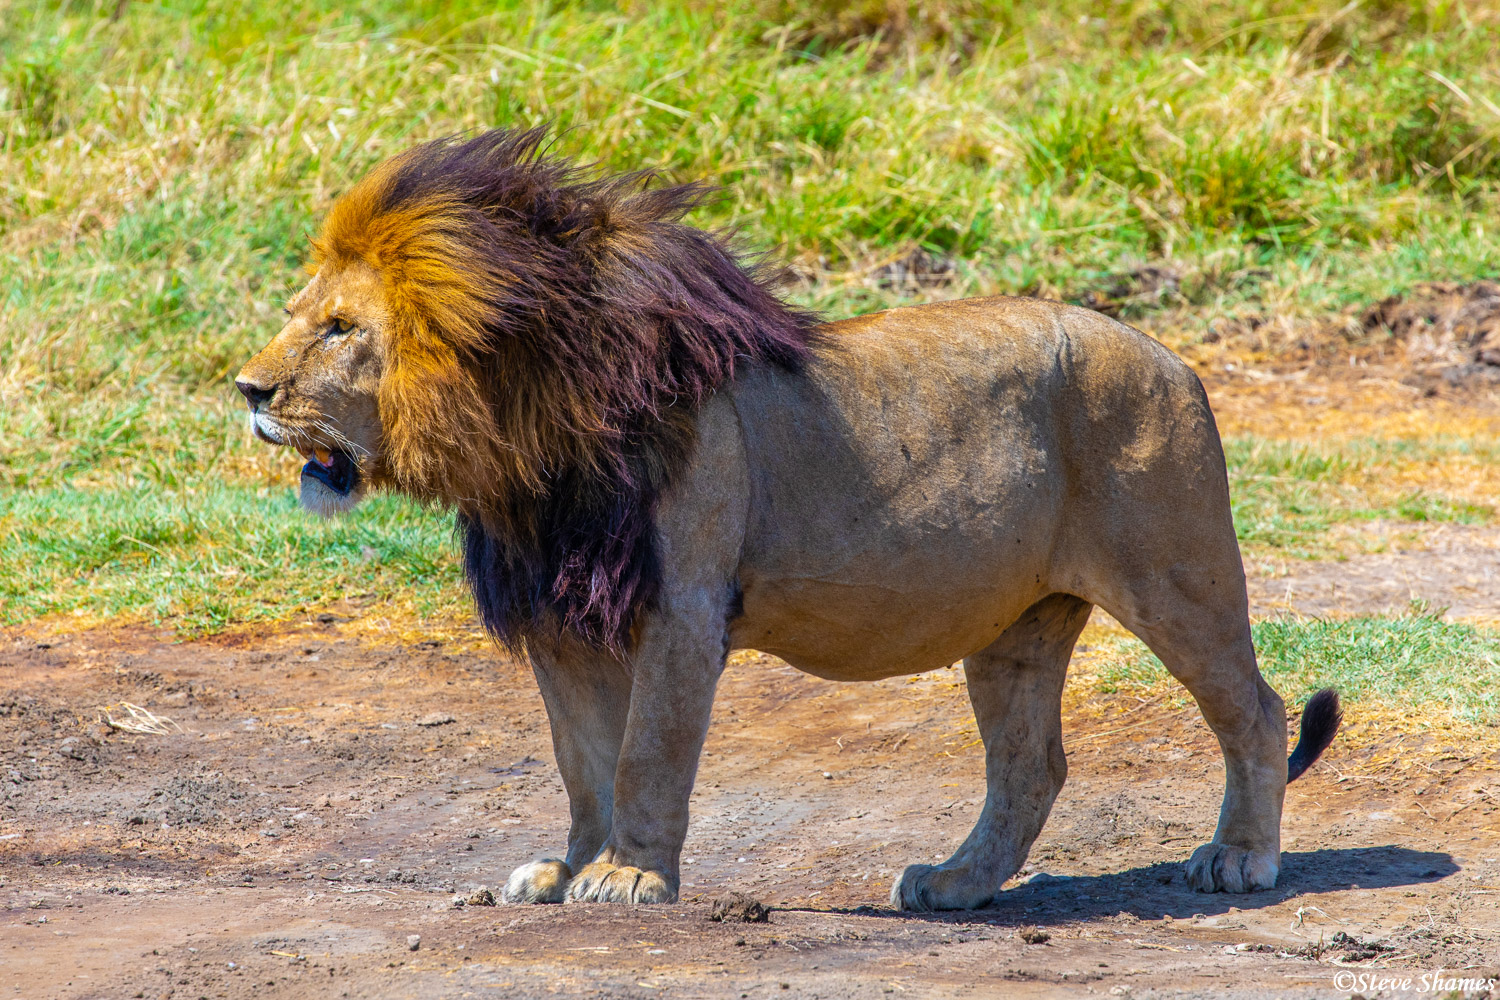 This big male lion is known as "Ziggy"